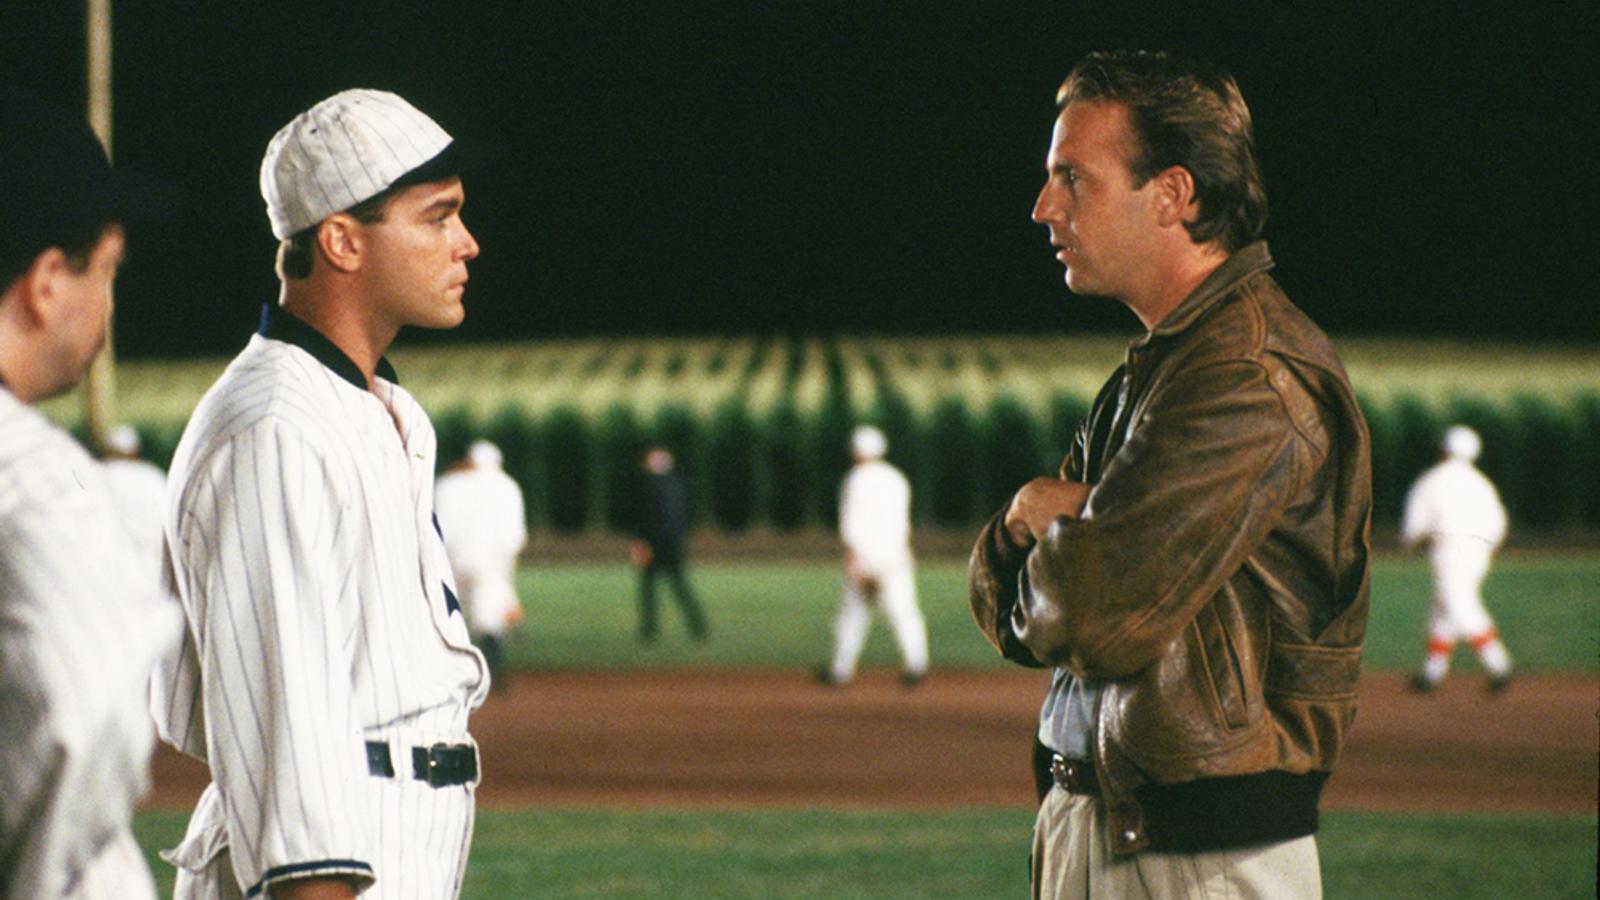 The Field of Dreams cornfield will host an MLB game!